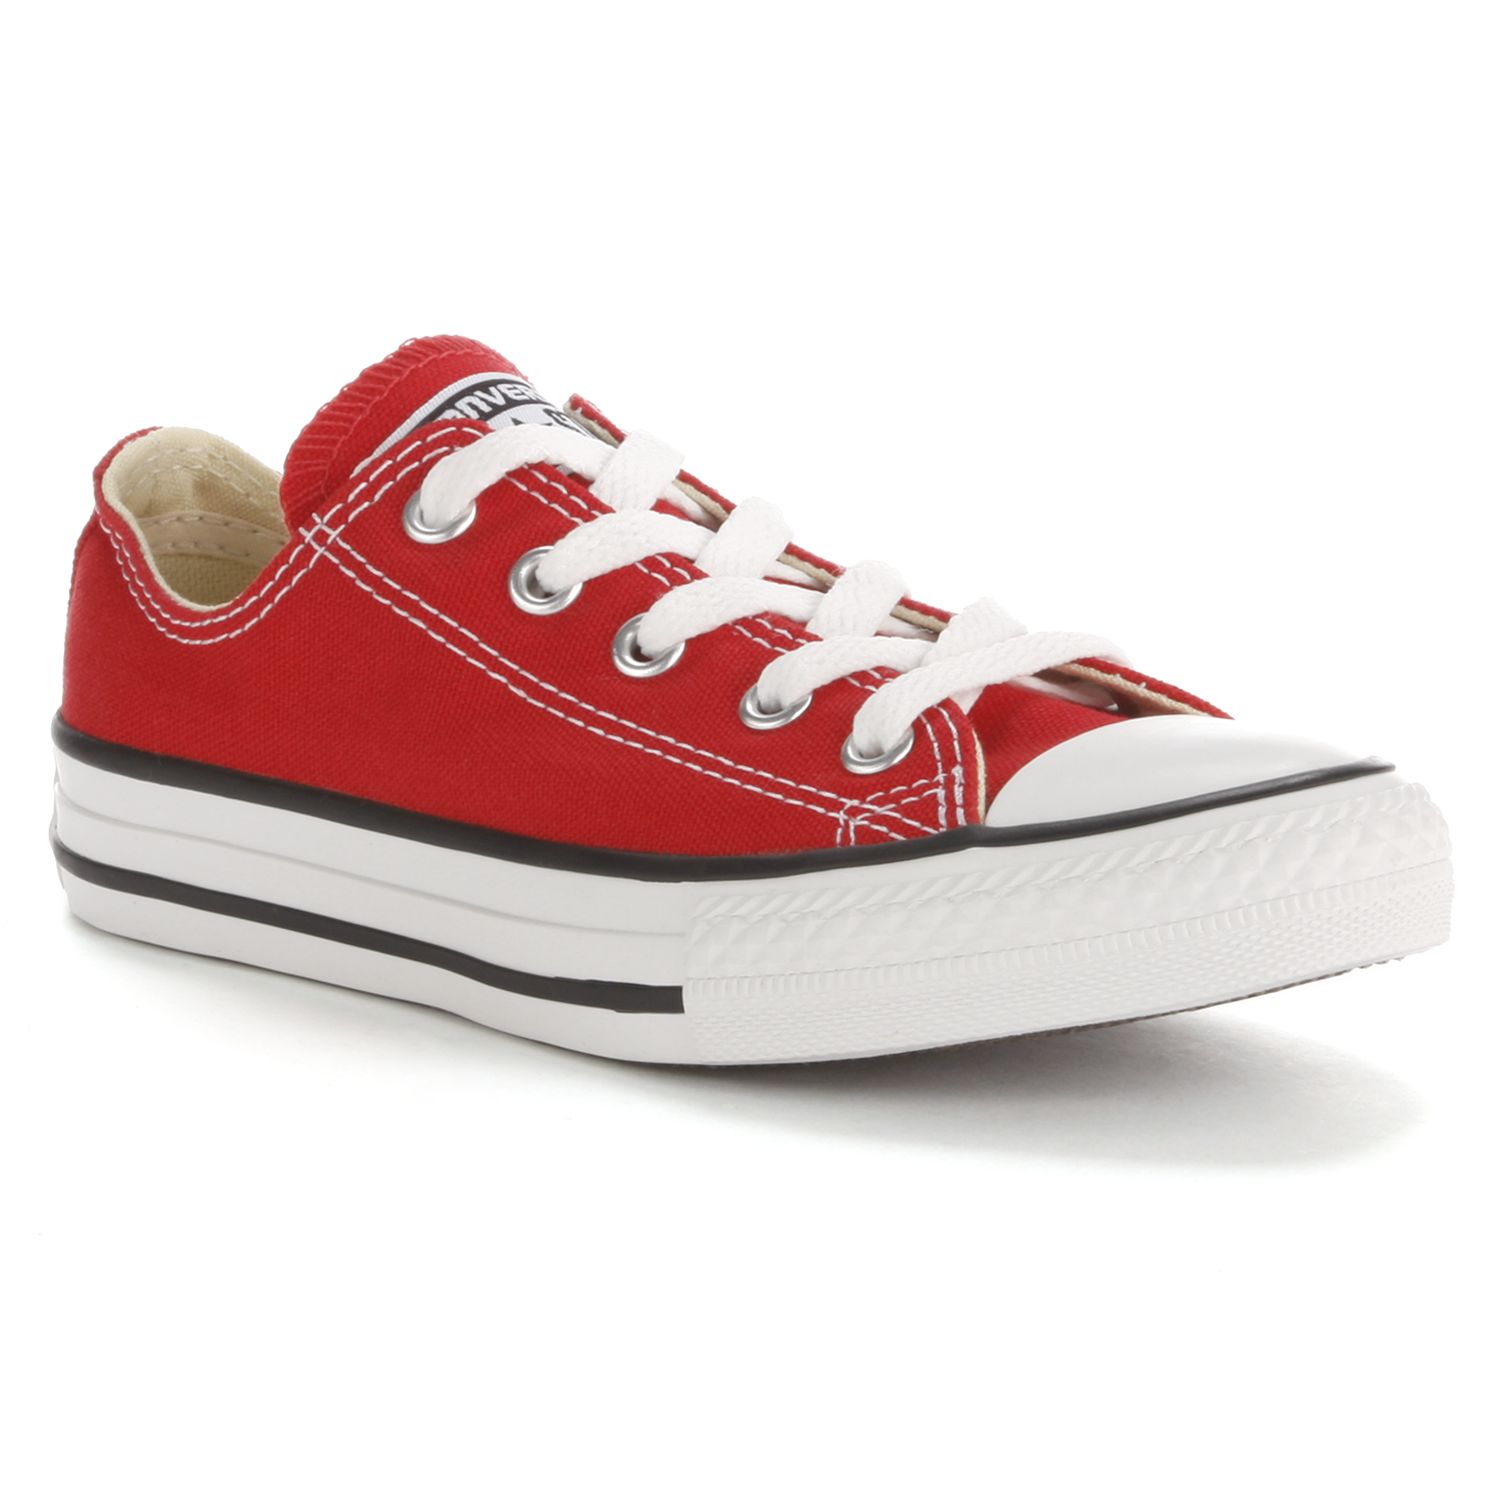 Red Converse | Kohl's